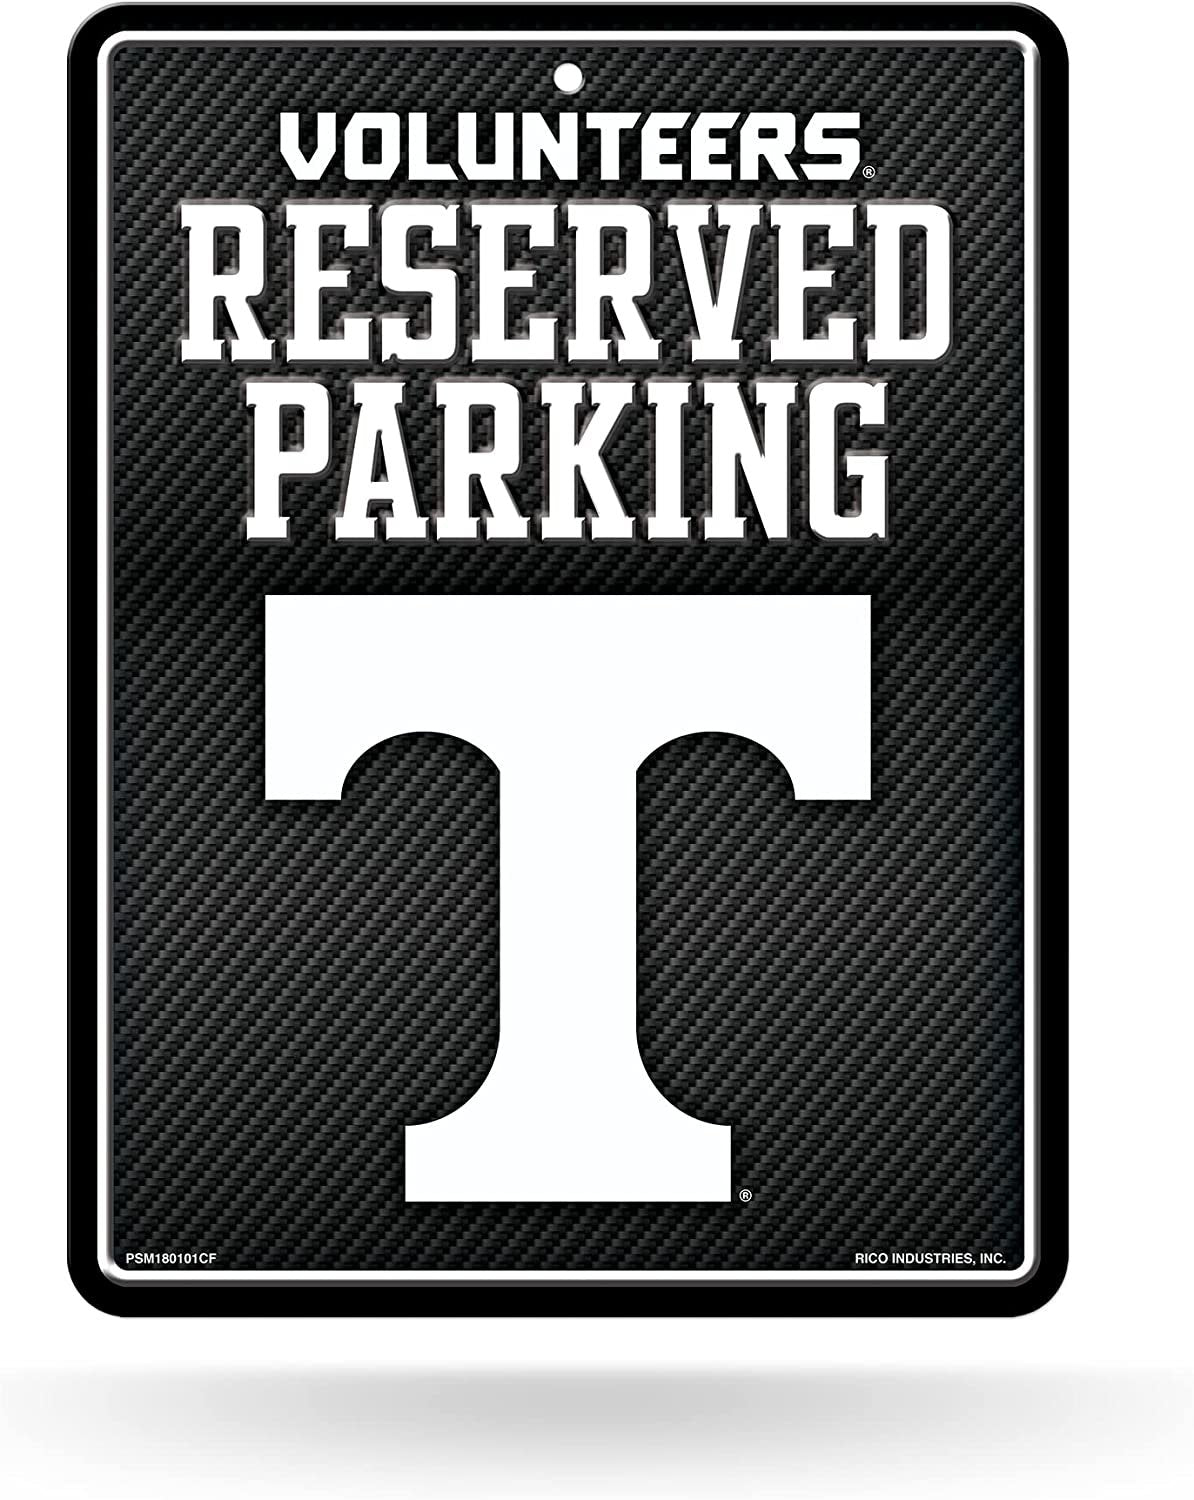 University of Tennessee Volunteers Metal Parking Novelty Wall Sign 8.5 x 11 Inch Carbon Fiber Design